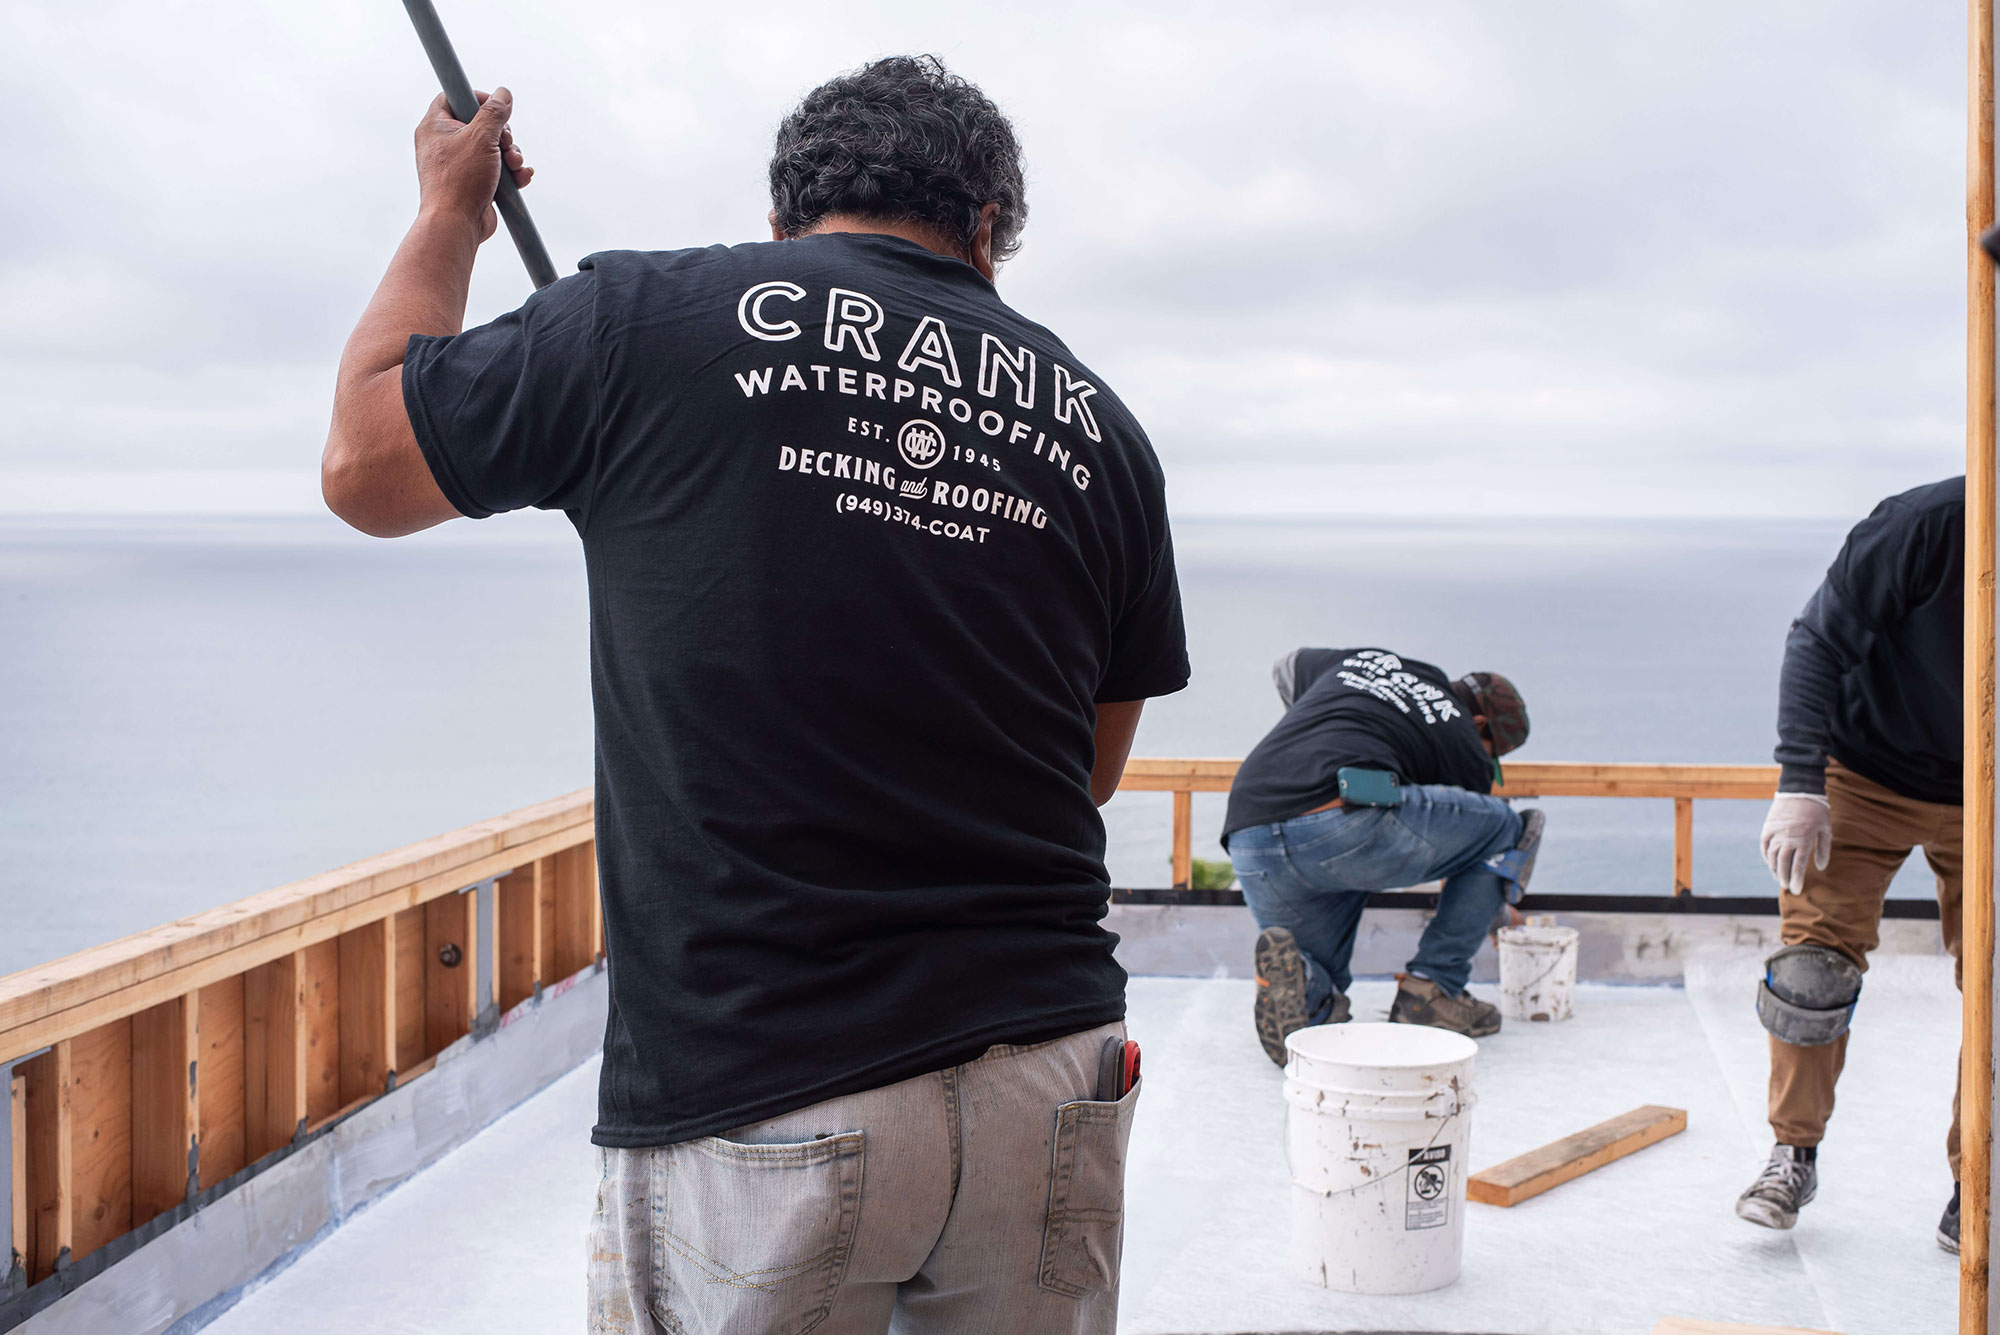 men rolling flat roof coatings to building by the ocean